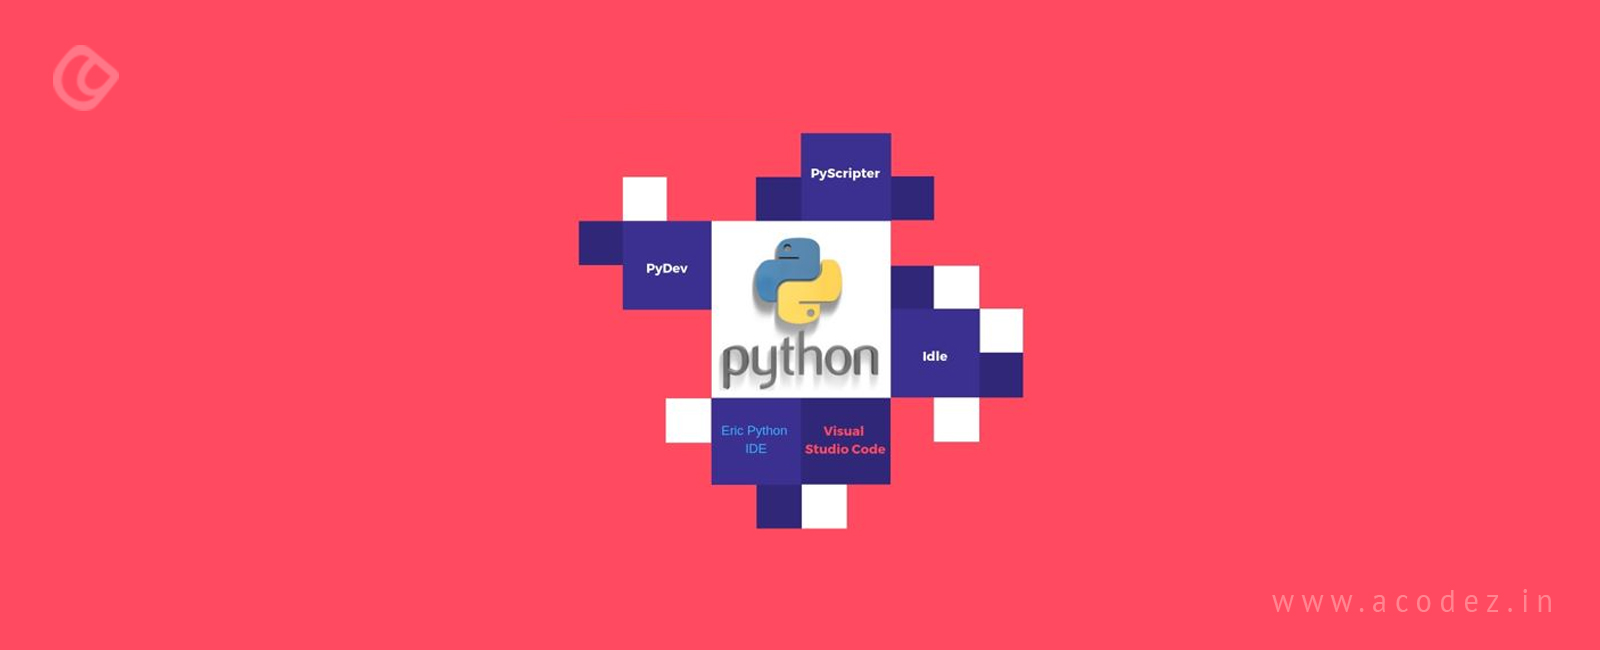 best code editor for mac for python 2018